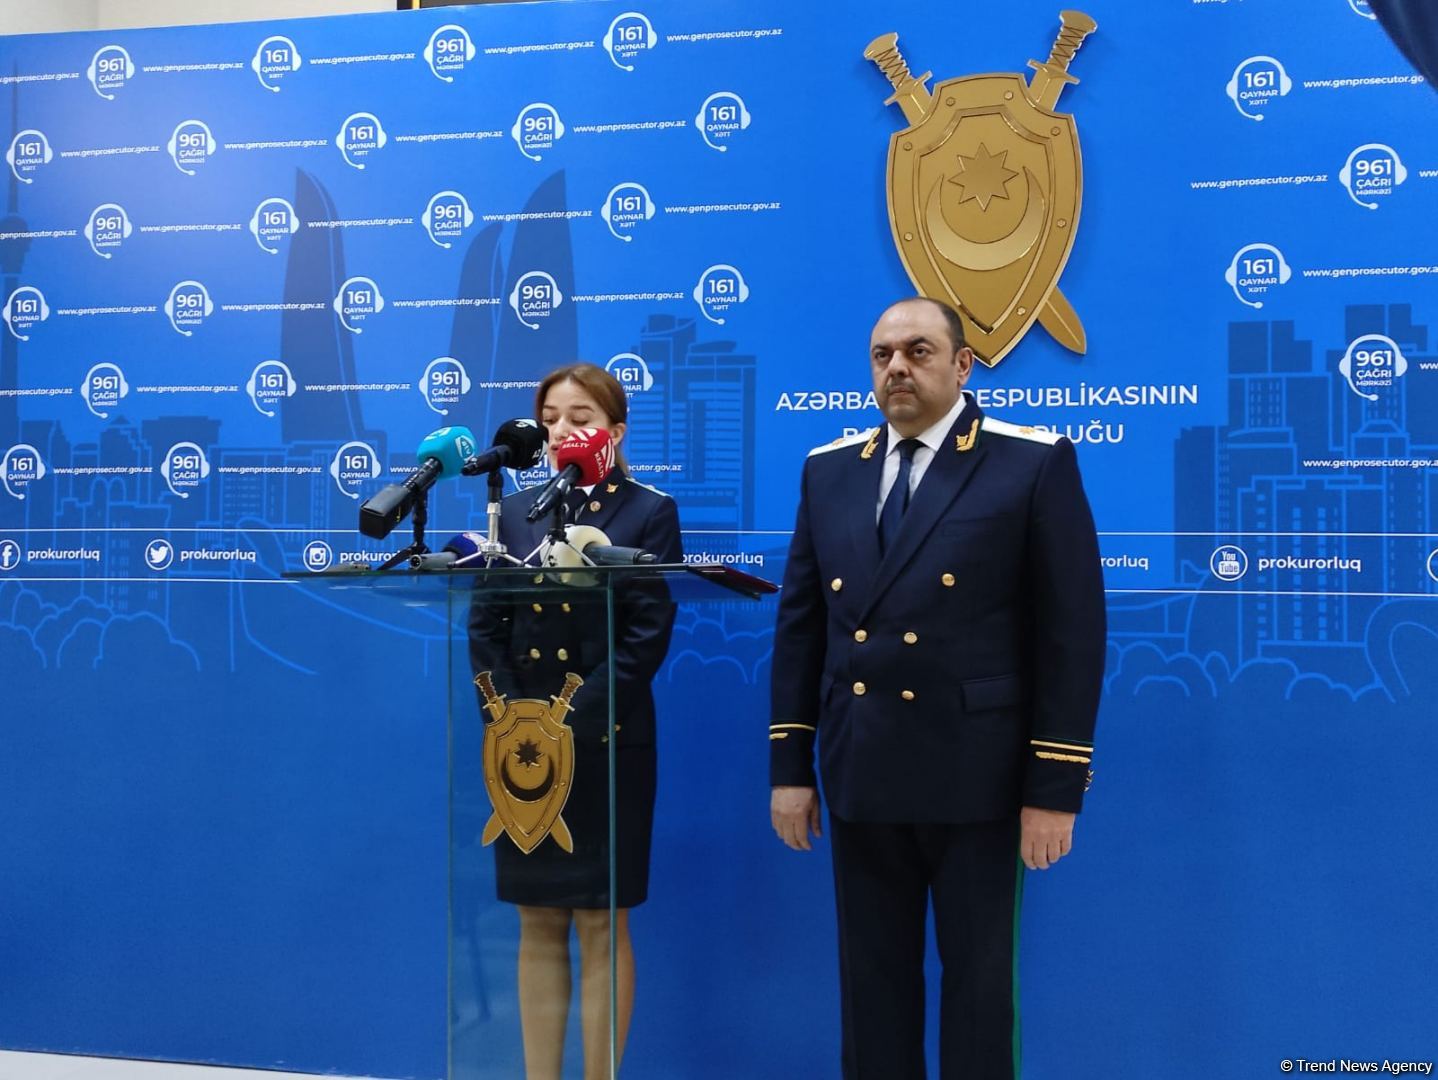 Witnesses of helicopter crash being questioned in Azerbaijan – First Deputy Prosecutor General